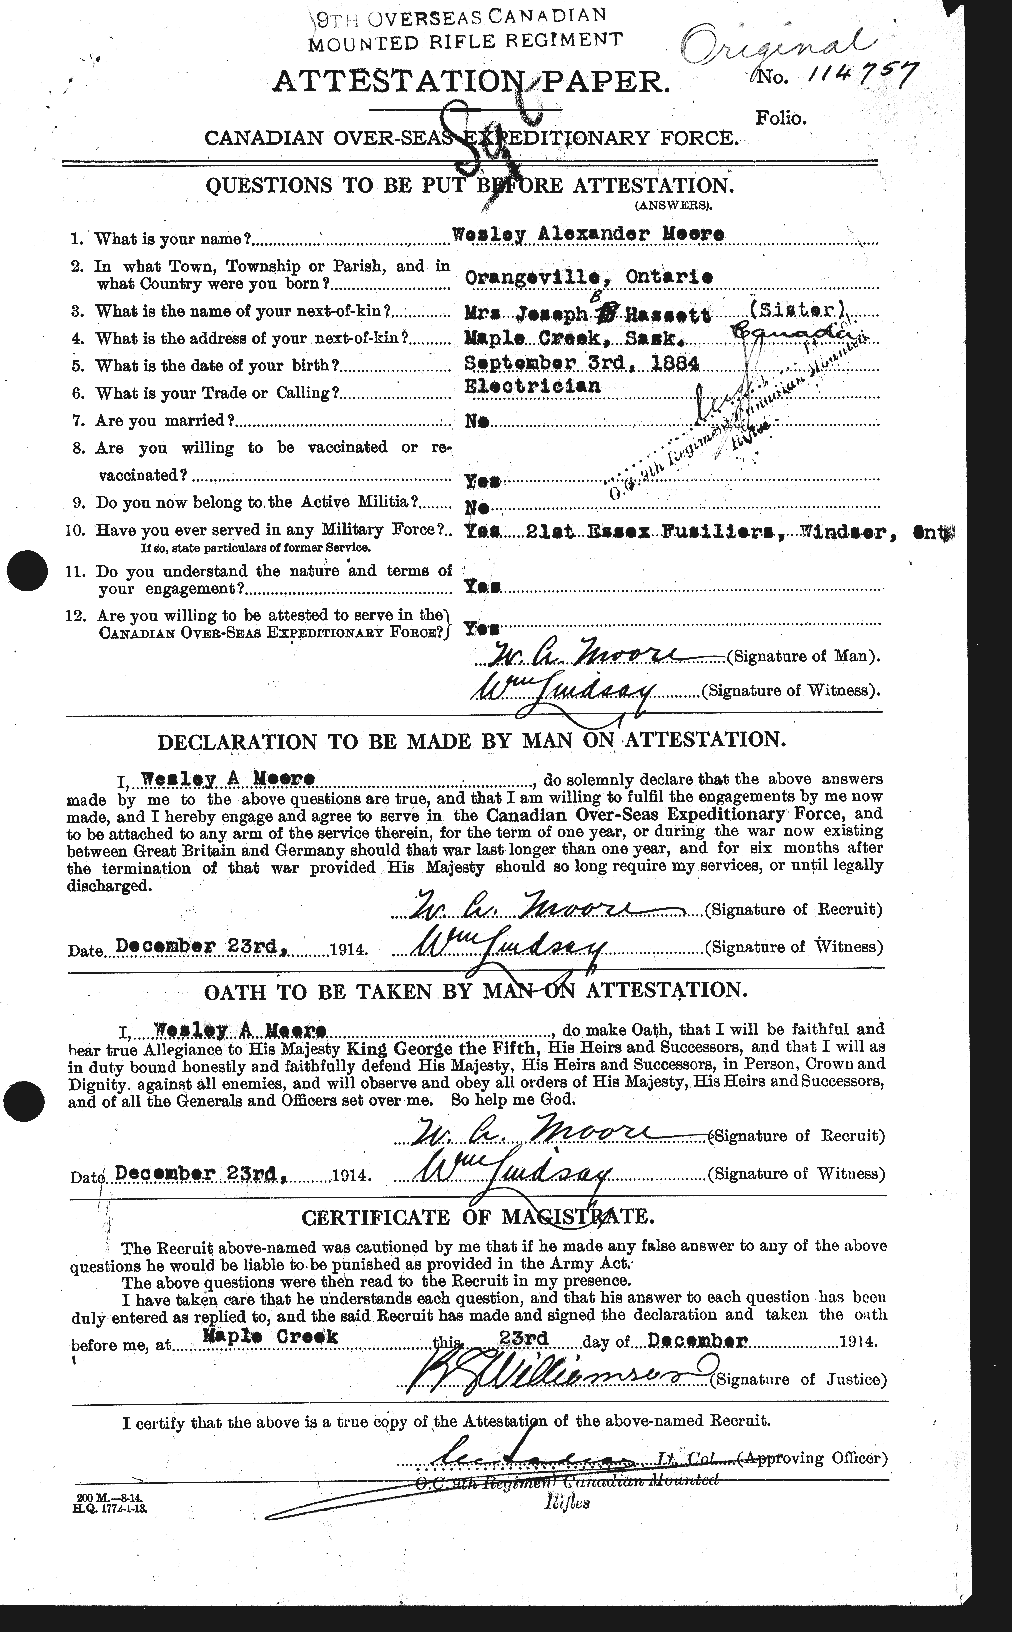 Personnel Records of the First World War - CEF 505725a